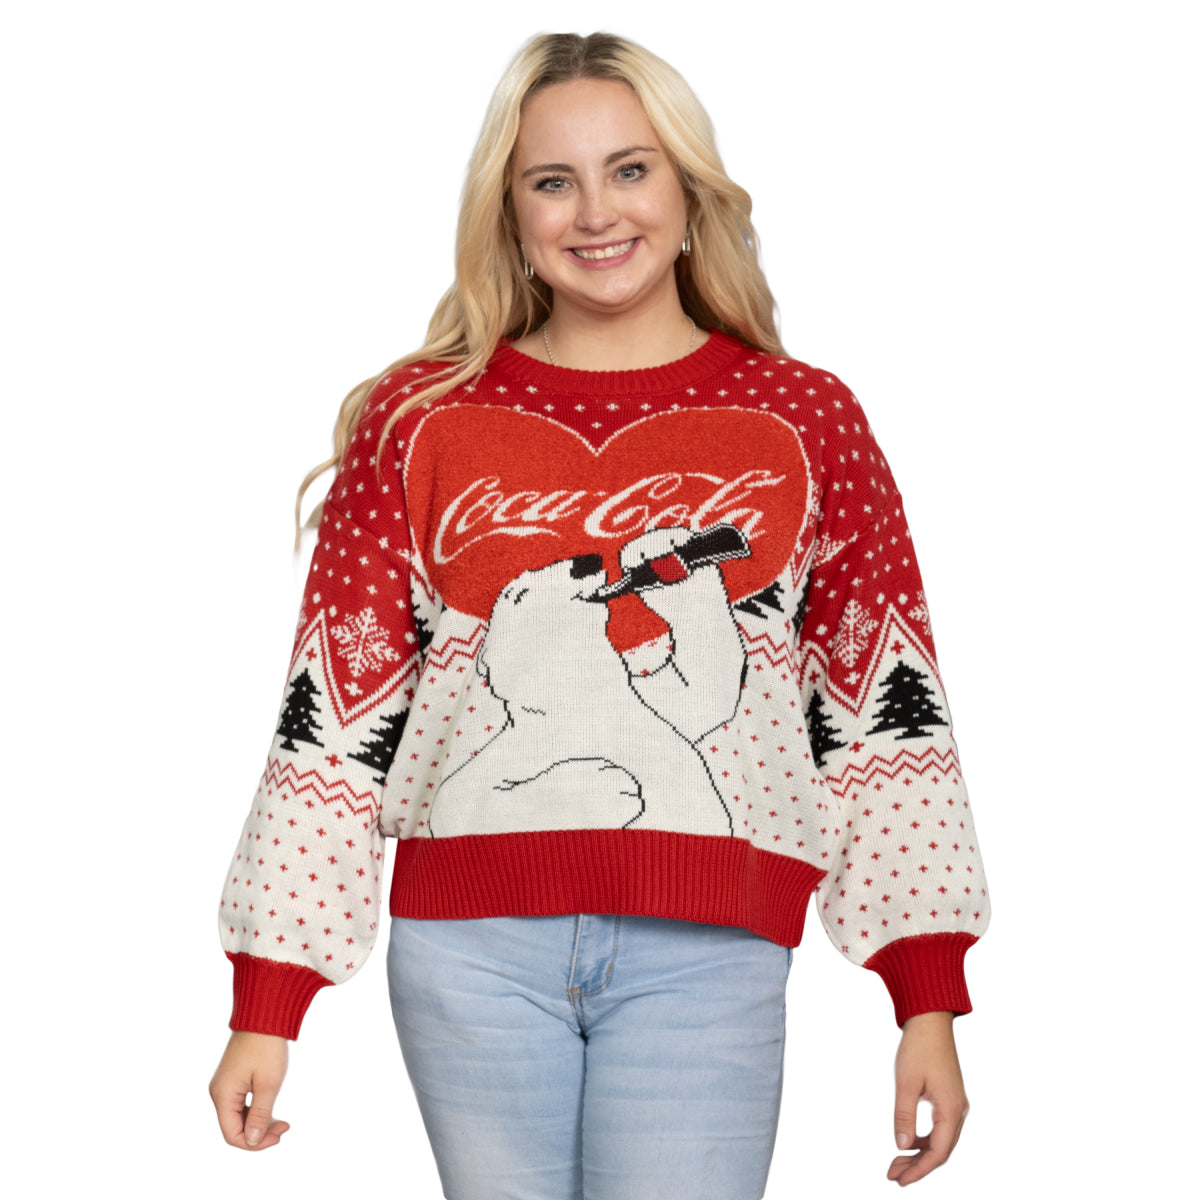 Coca-Cola Heart Bear Spread Joy with Festive Ugly Sweater Christmas Sweaters Front View